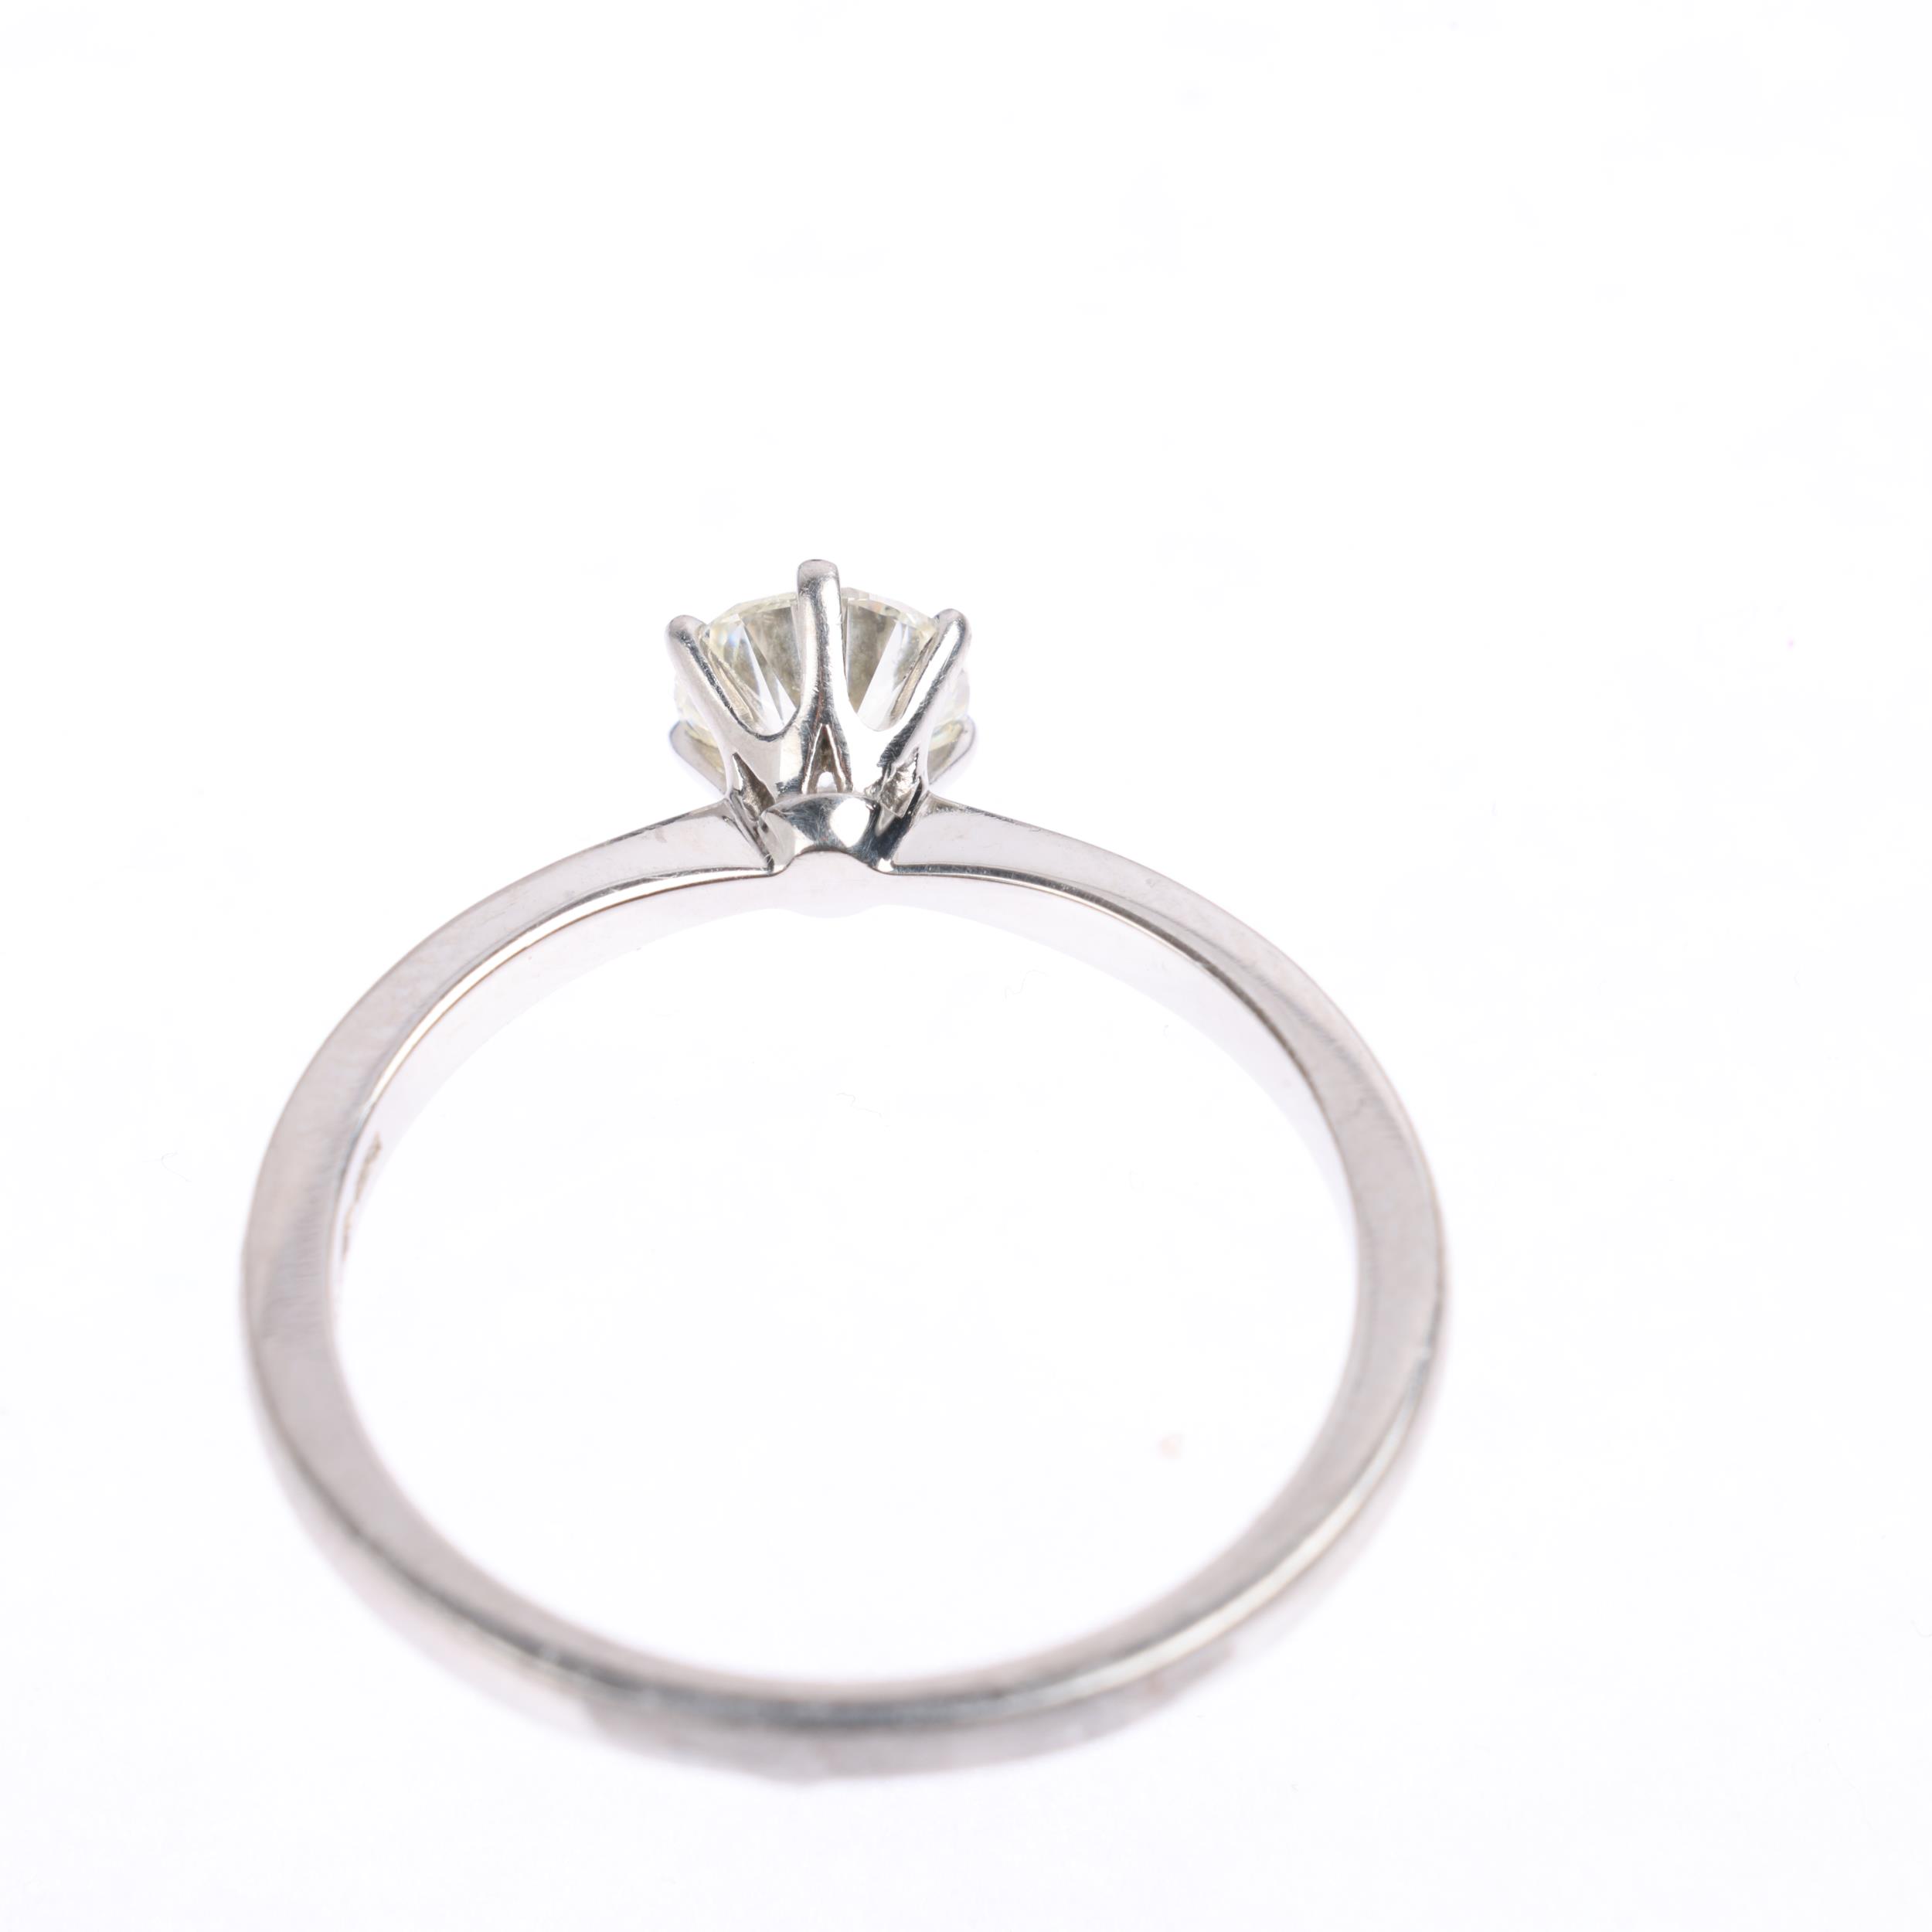 A platinum 0.7ct solitaire diamond ring, 6-claw set with modern round brilliant-cut diamond, - Image 3 of 4